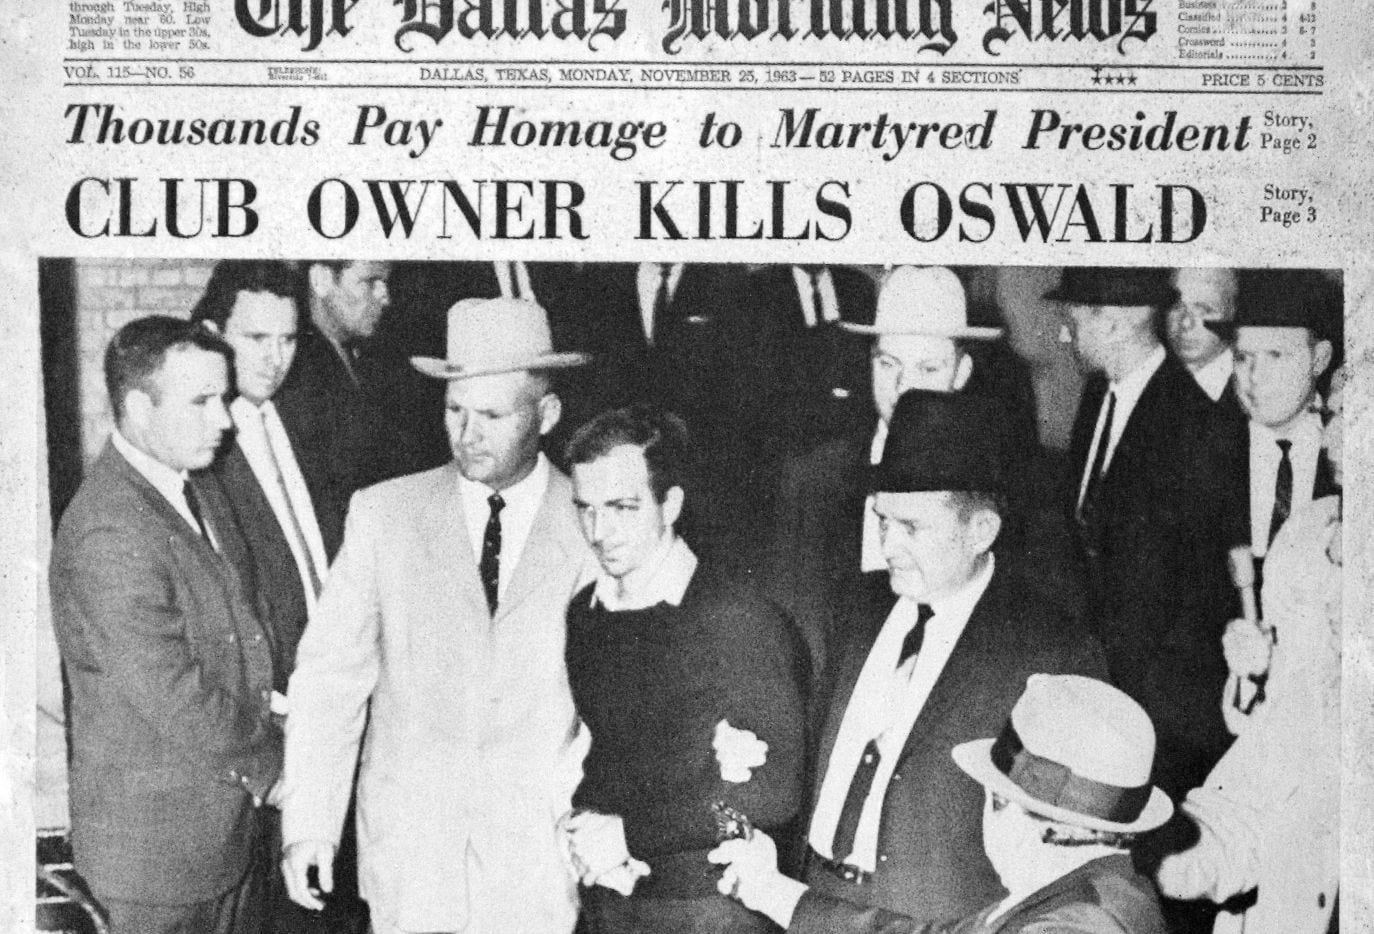 Photographer snapped Oswald's murder a hair too soon, lost Pulitzer, place  in history to rival